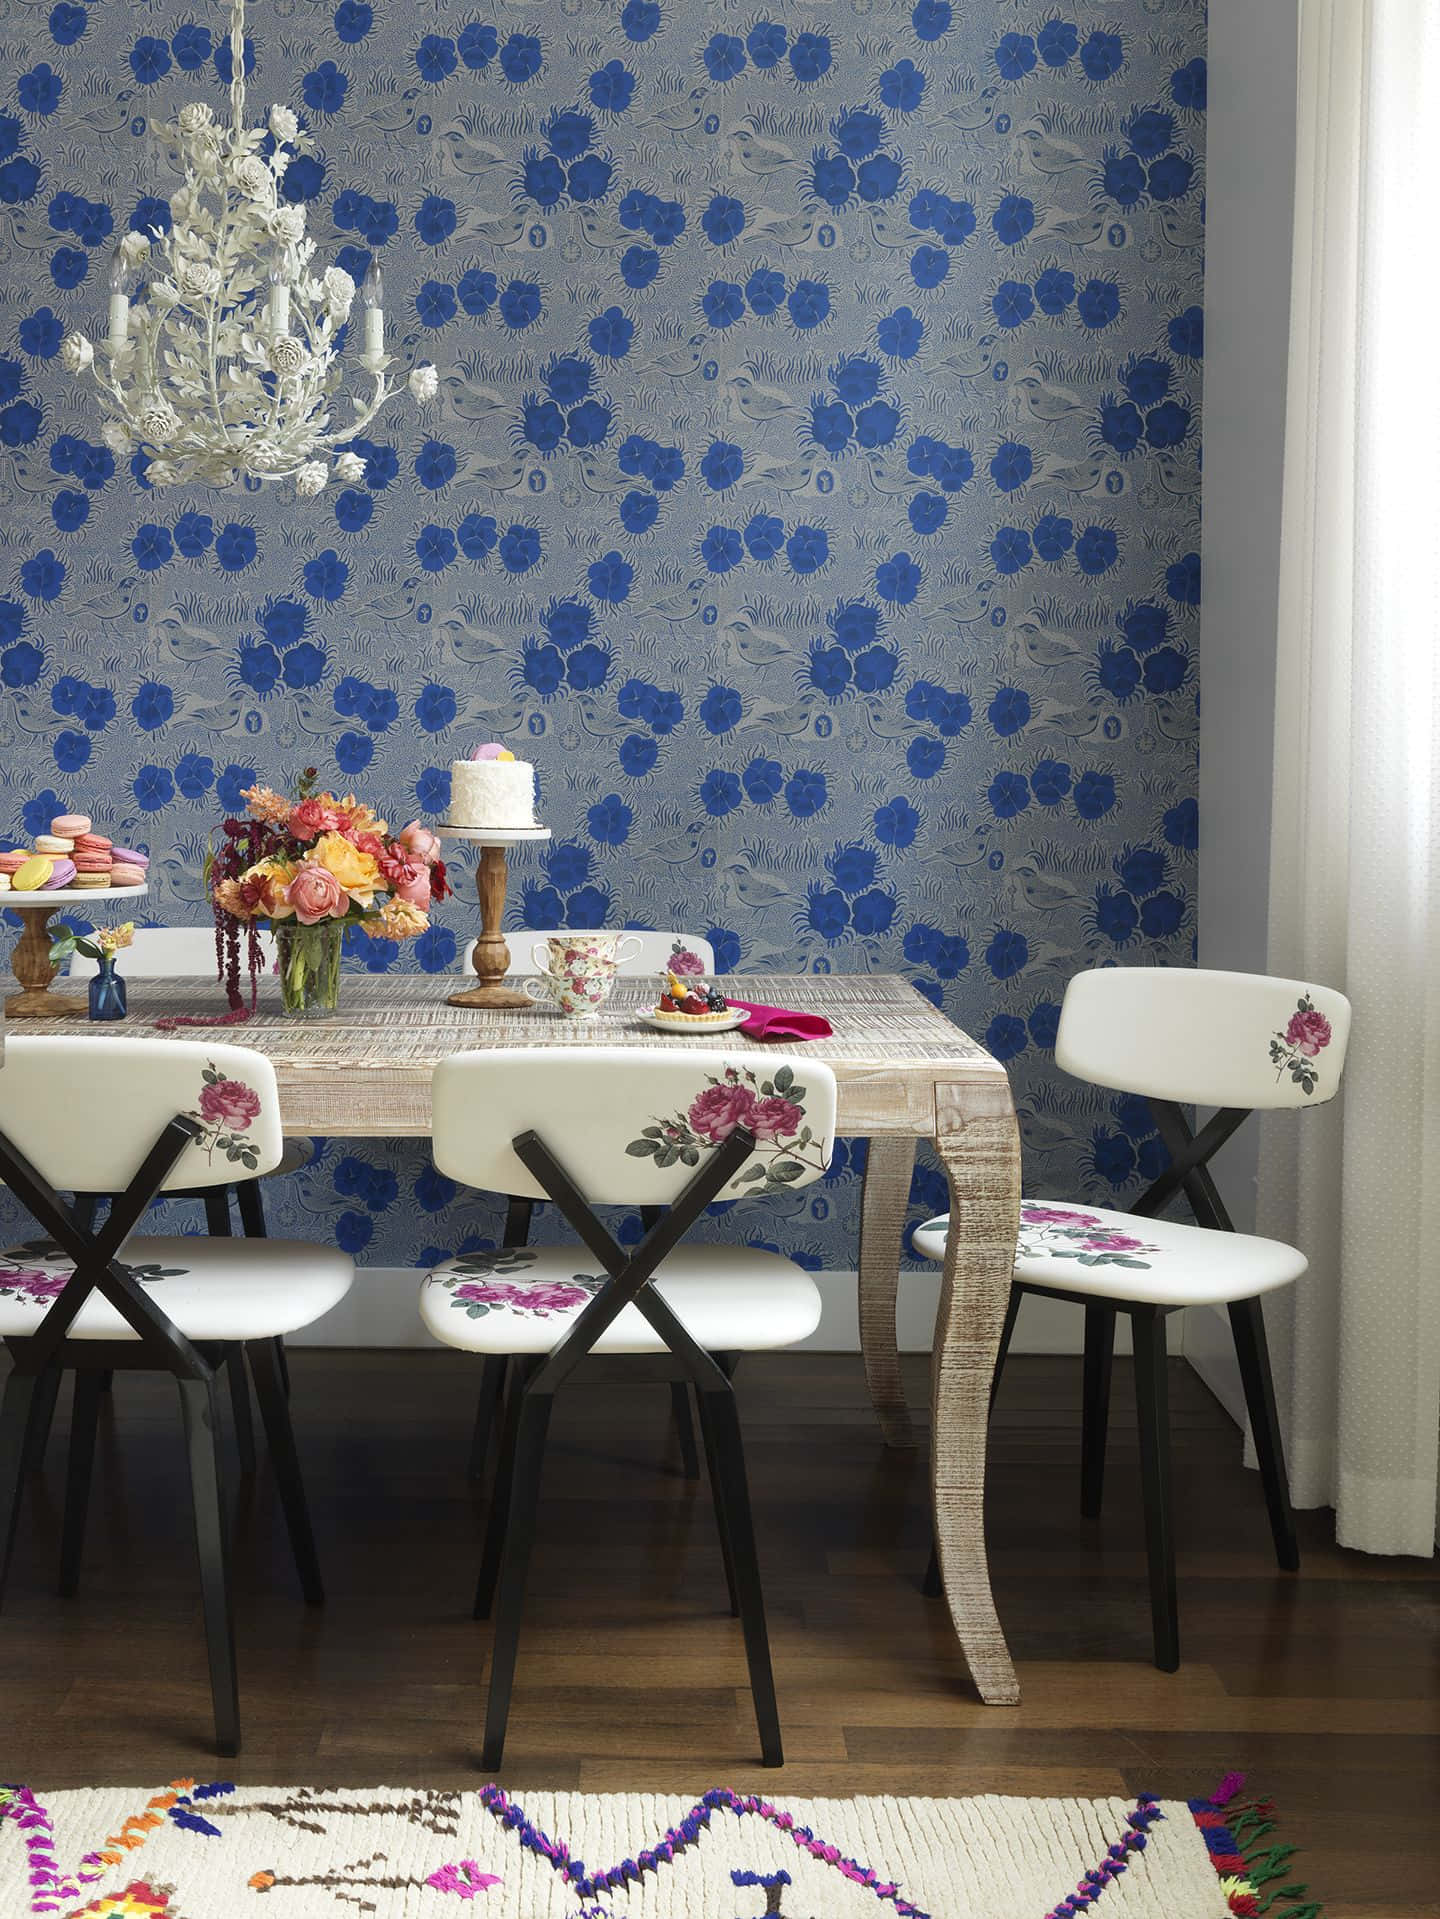 Dining Room With White Floral Chairs Wallpaper